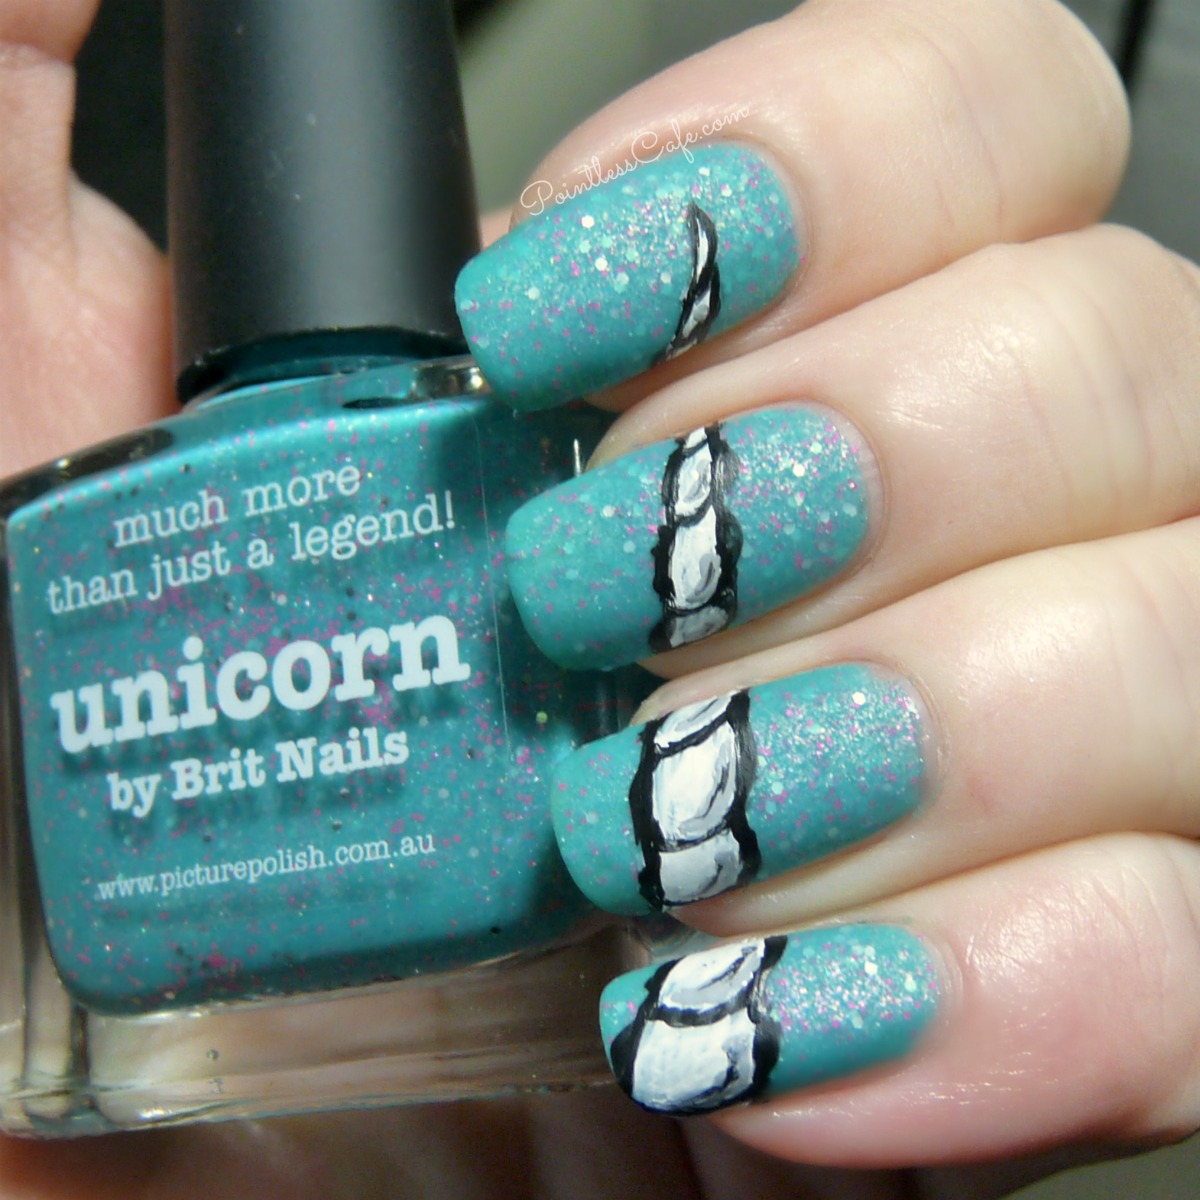 piCture pOlish Unicorn - Swatches, Review and Nail Art | Pointless Cafe